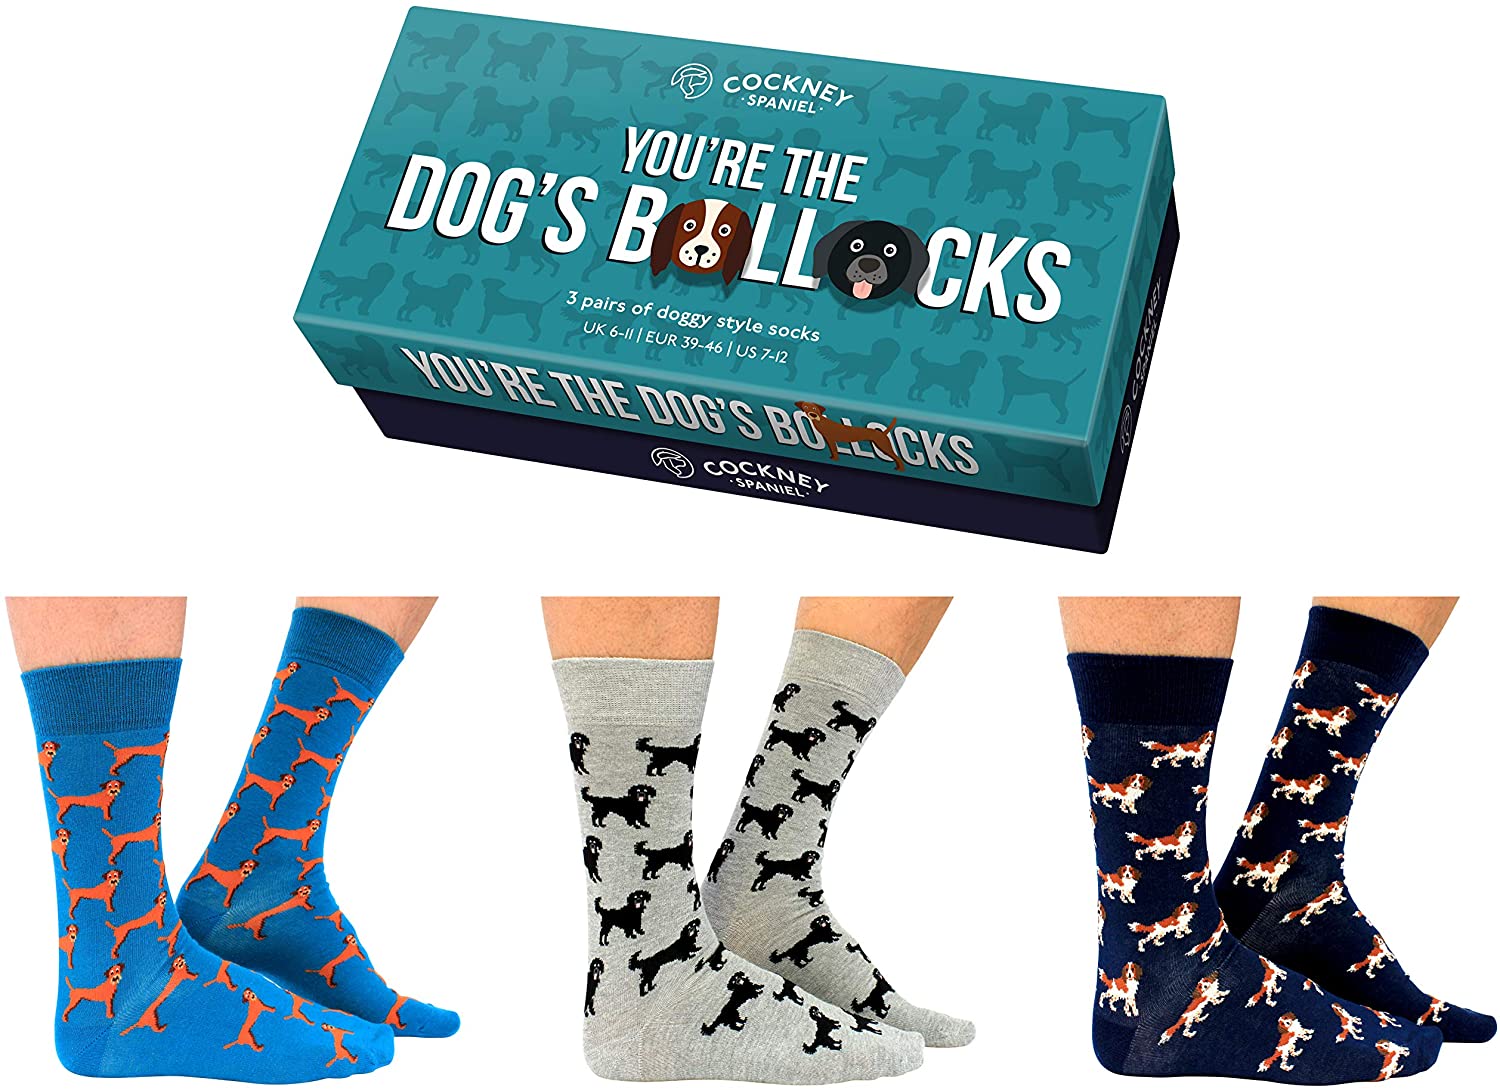 Cockney Spaniel Socks Funny / Rude Box Set - You're the dogs....